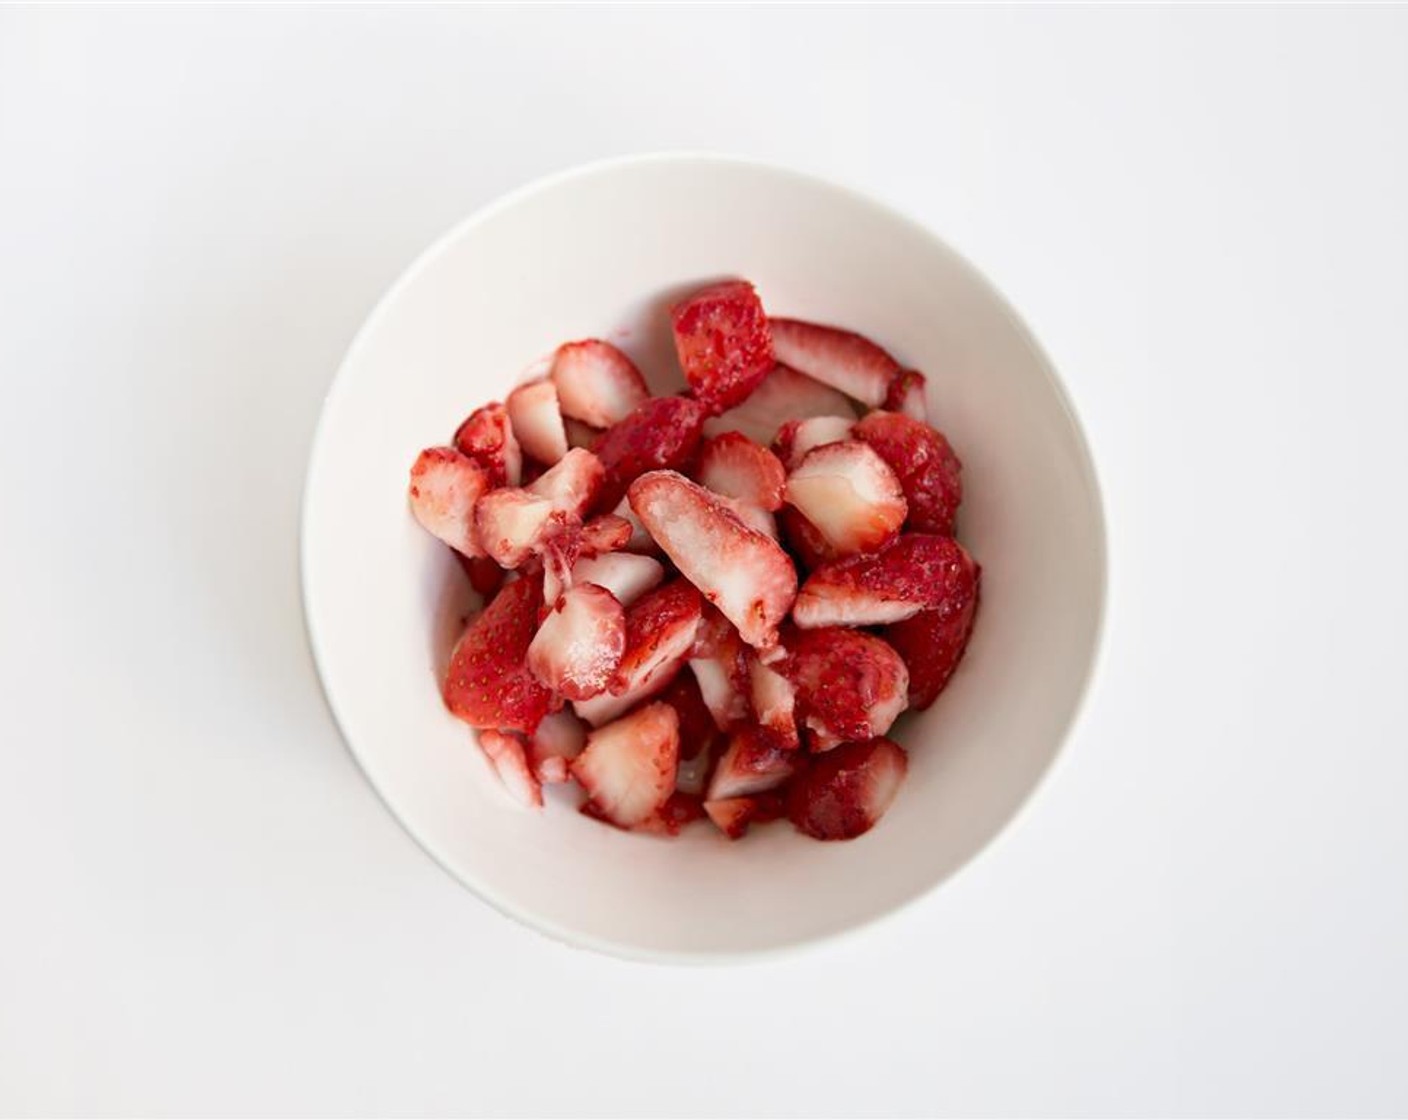 step 1 Chop hulled Frozen Strawberries (3 cups). Combine strawberries with Granulated Sugar (1/4 cup) and let stand for 20 minutes, stirring occasionally.